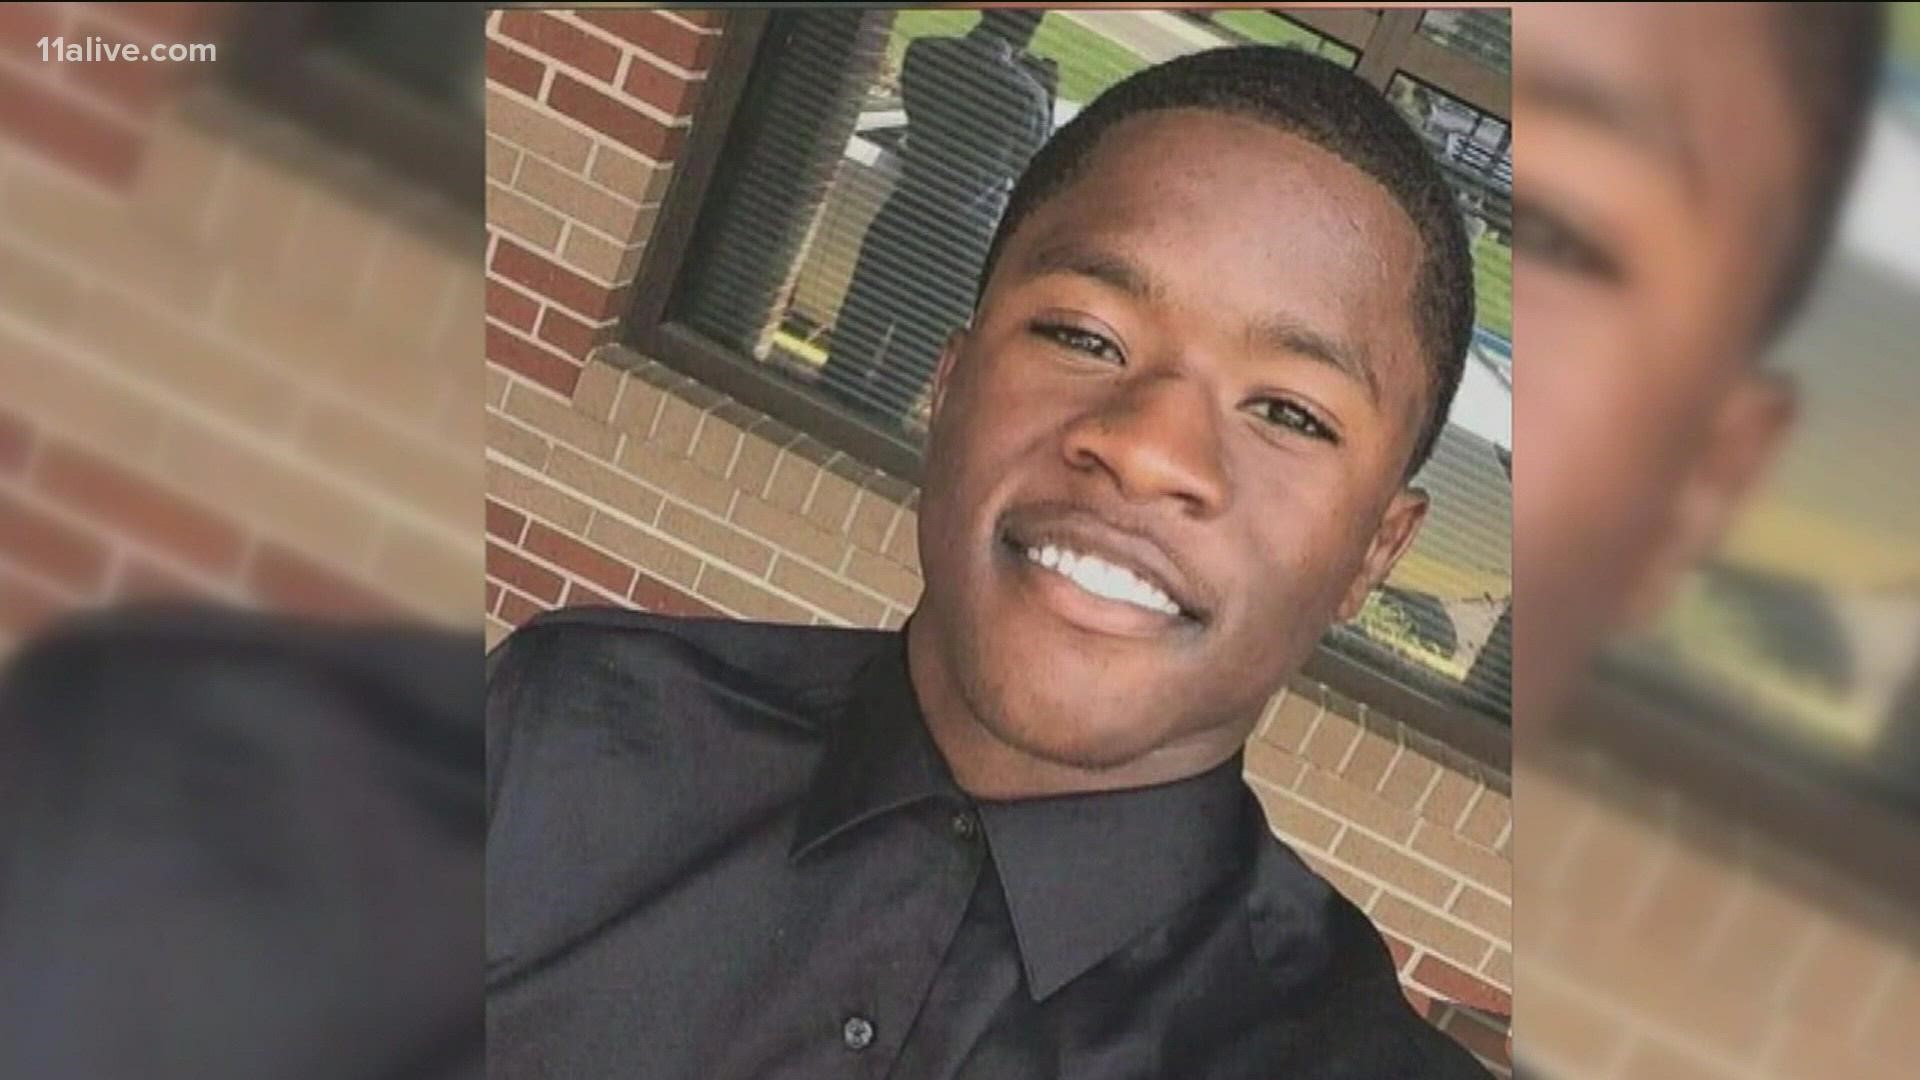 A sad end in the search for missing Illinois State University graduate student Jelani Day.